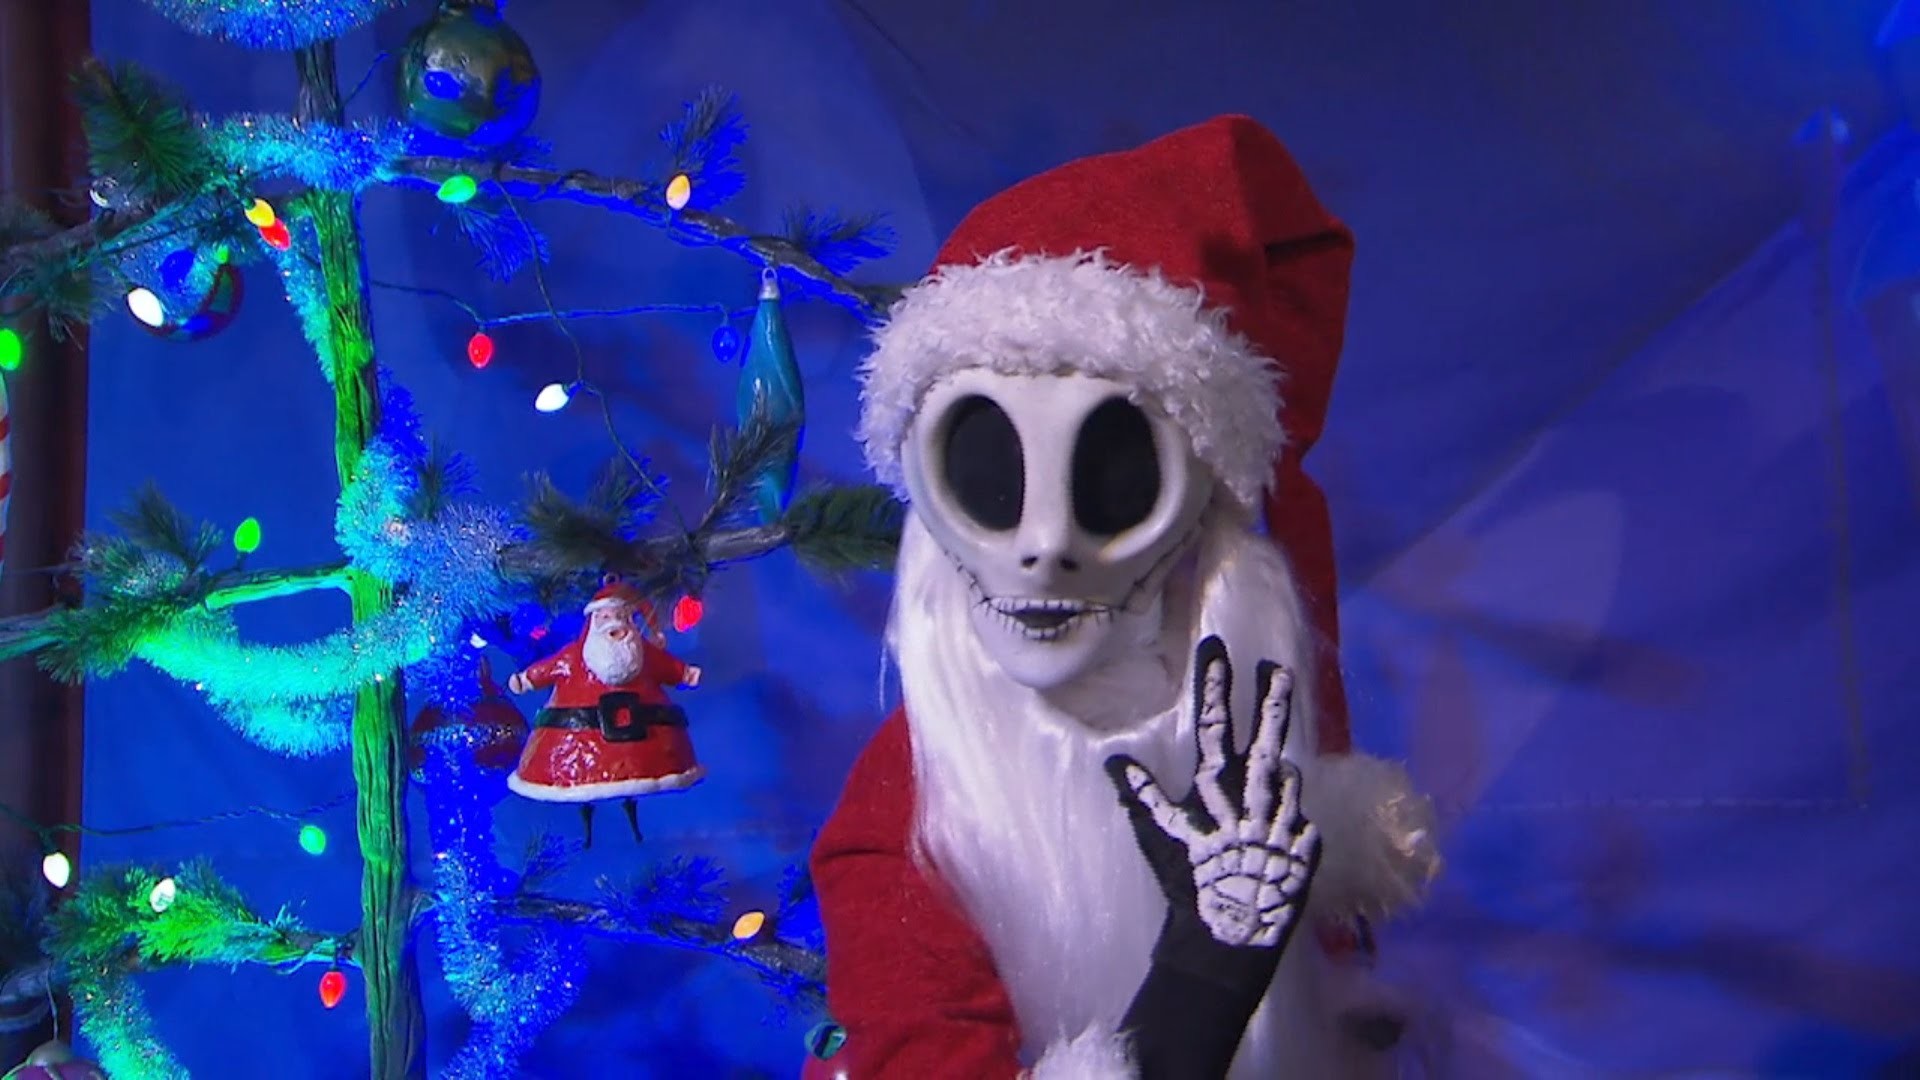 Meet Jack Skellington as Sandy Claws during Very Merry Christmas Party – YouTube